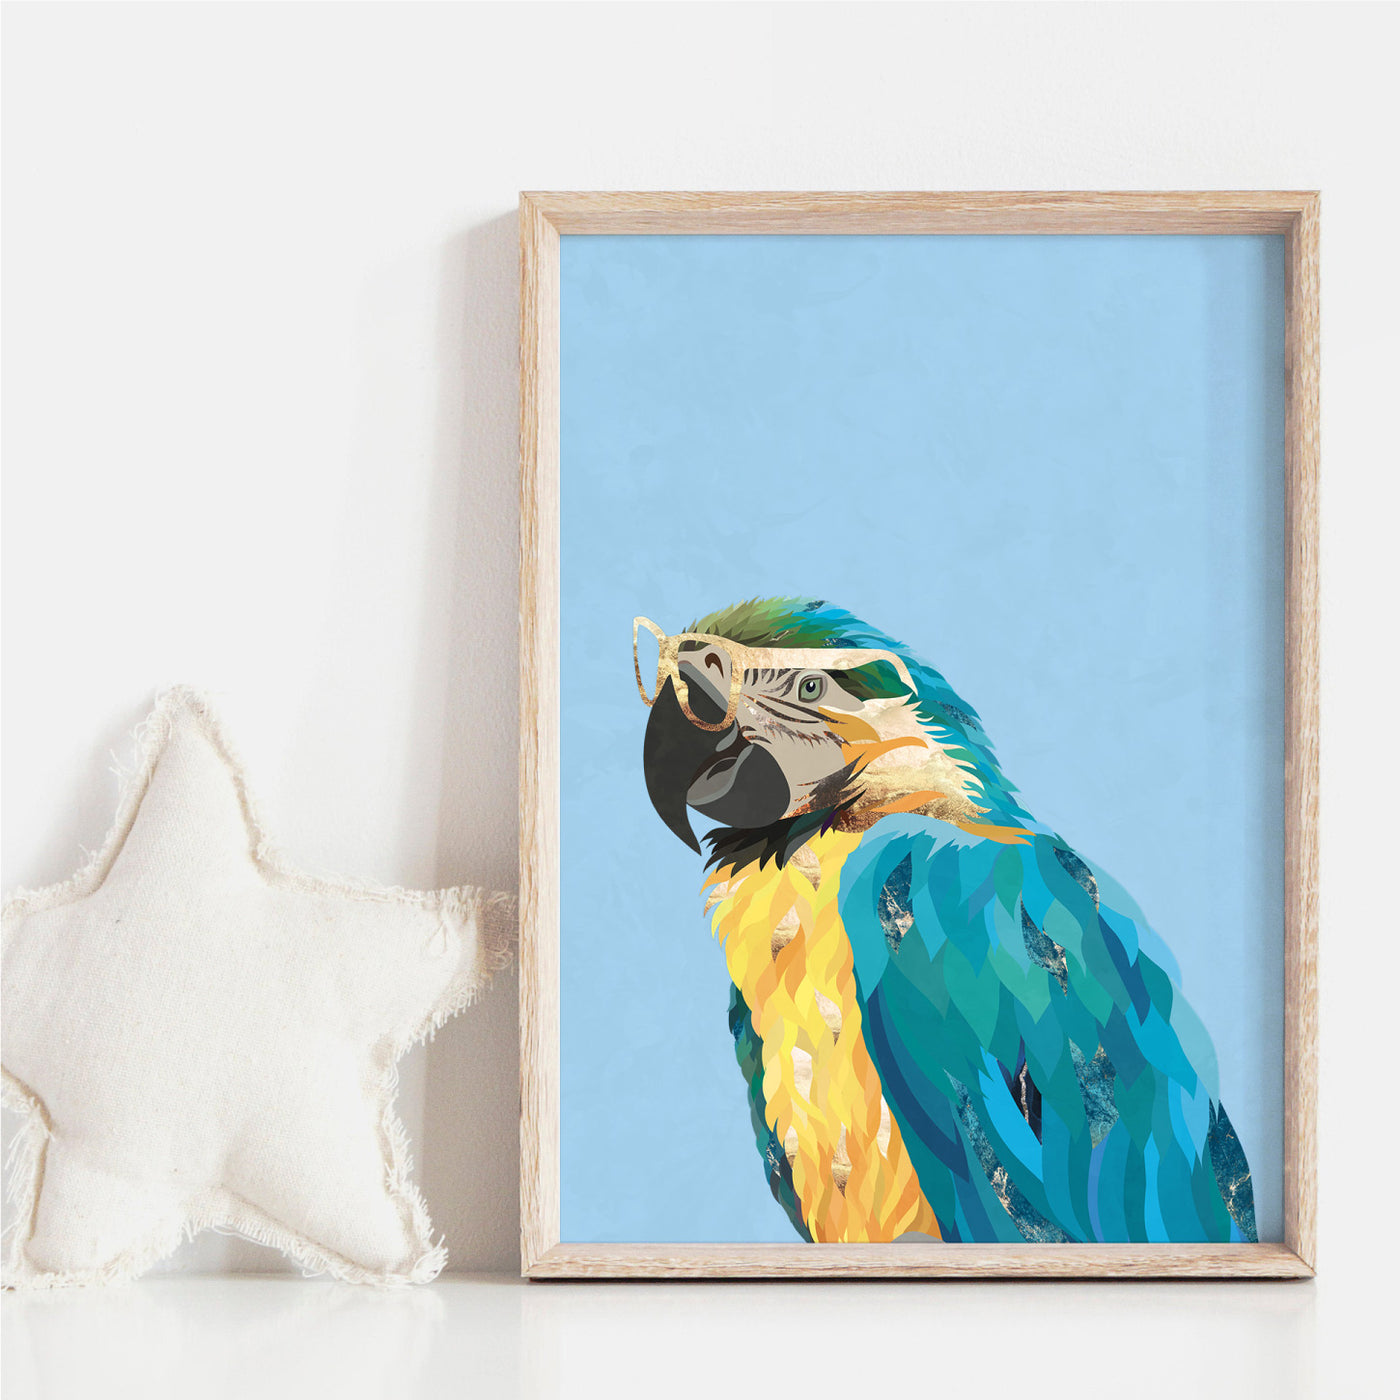 Parrot Pop - Art Print, Poster, Stretched Canvas or Framed Wall Art, shown framed in a home interior space